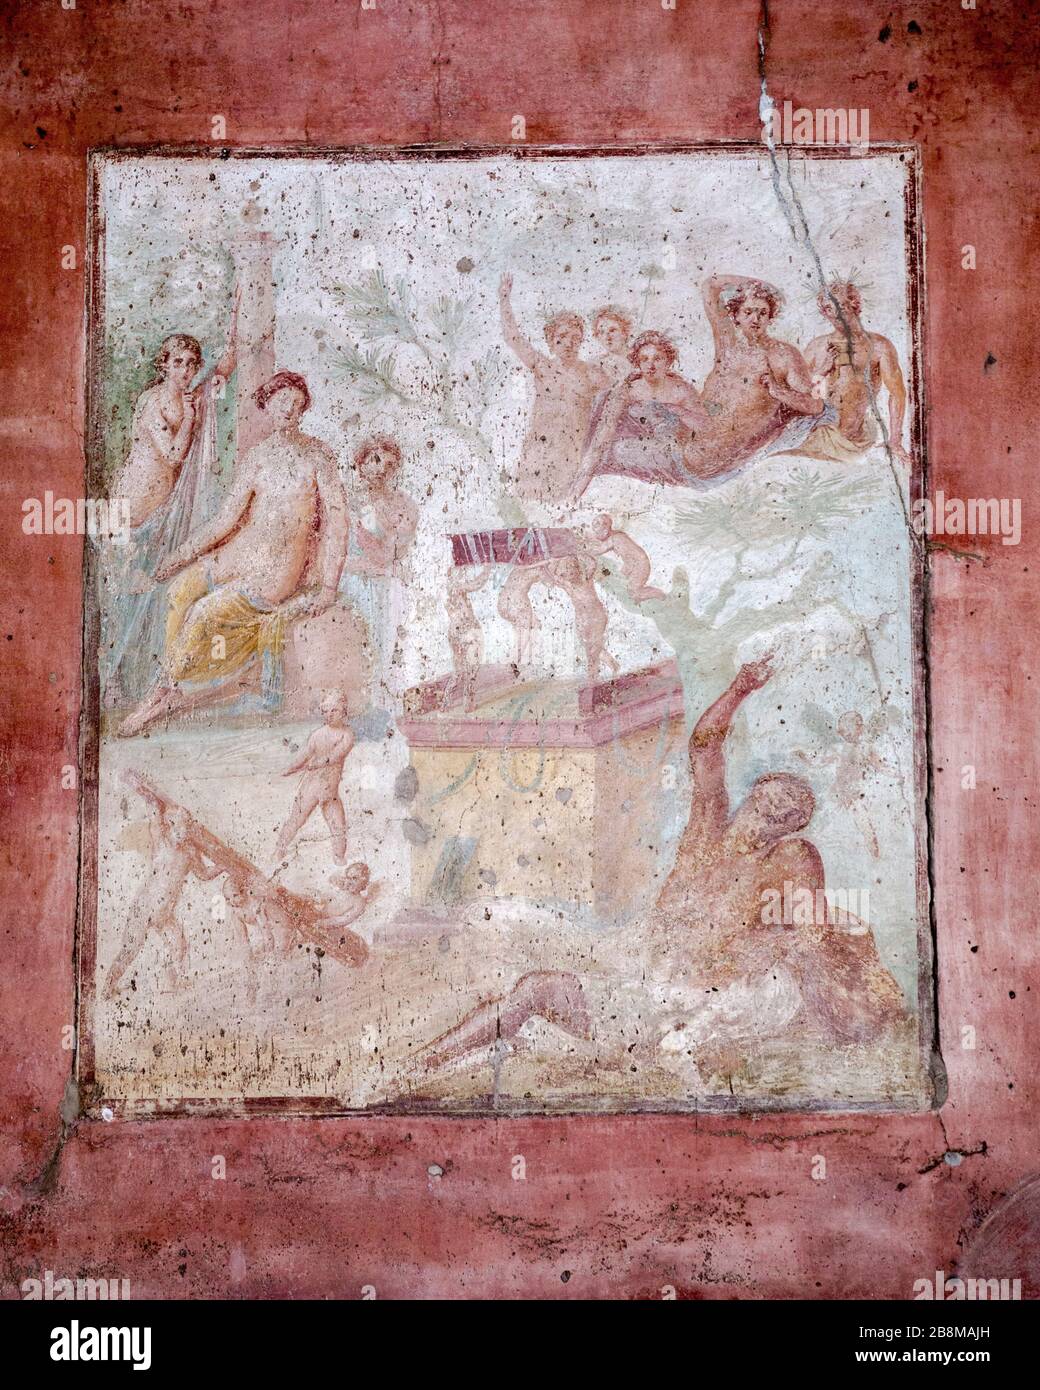 Ancient painted wall fresco in Pompeii destroyed by the 79BC eruption of Mount Vesuvius, Campania, Italy. Stock Photo